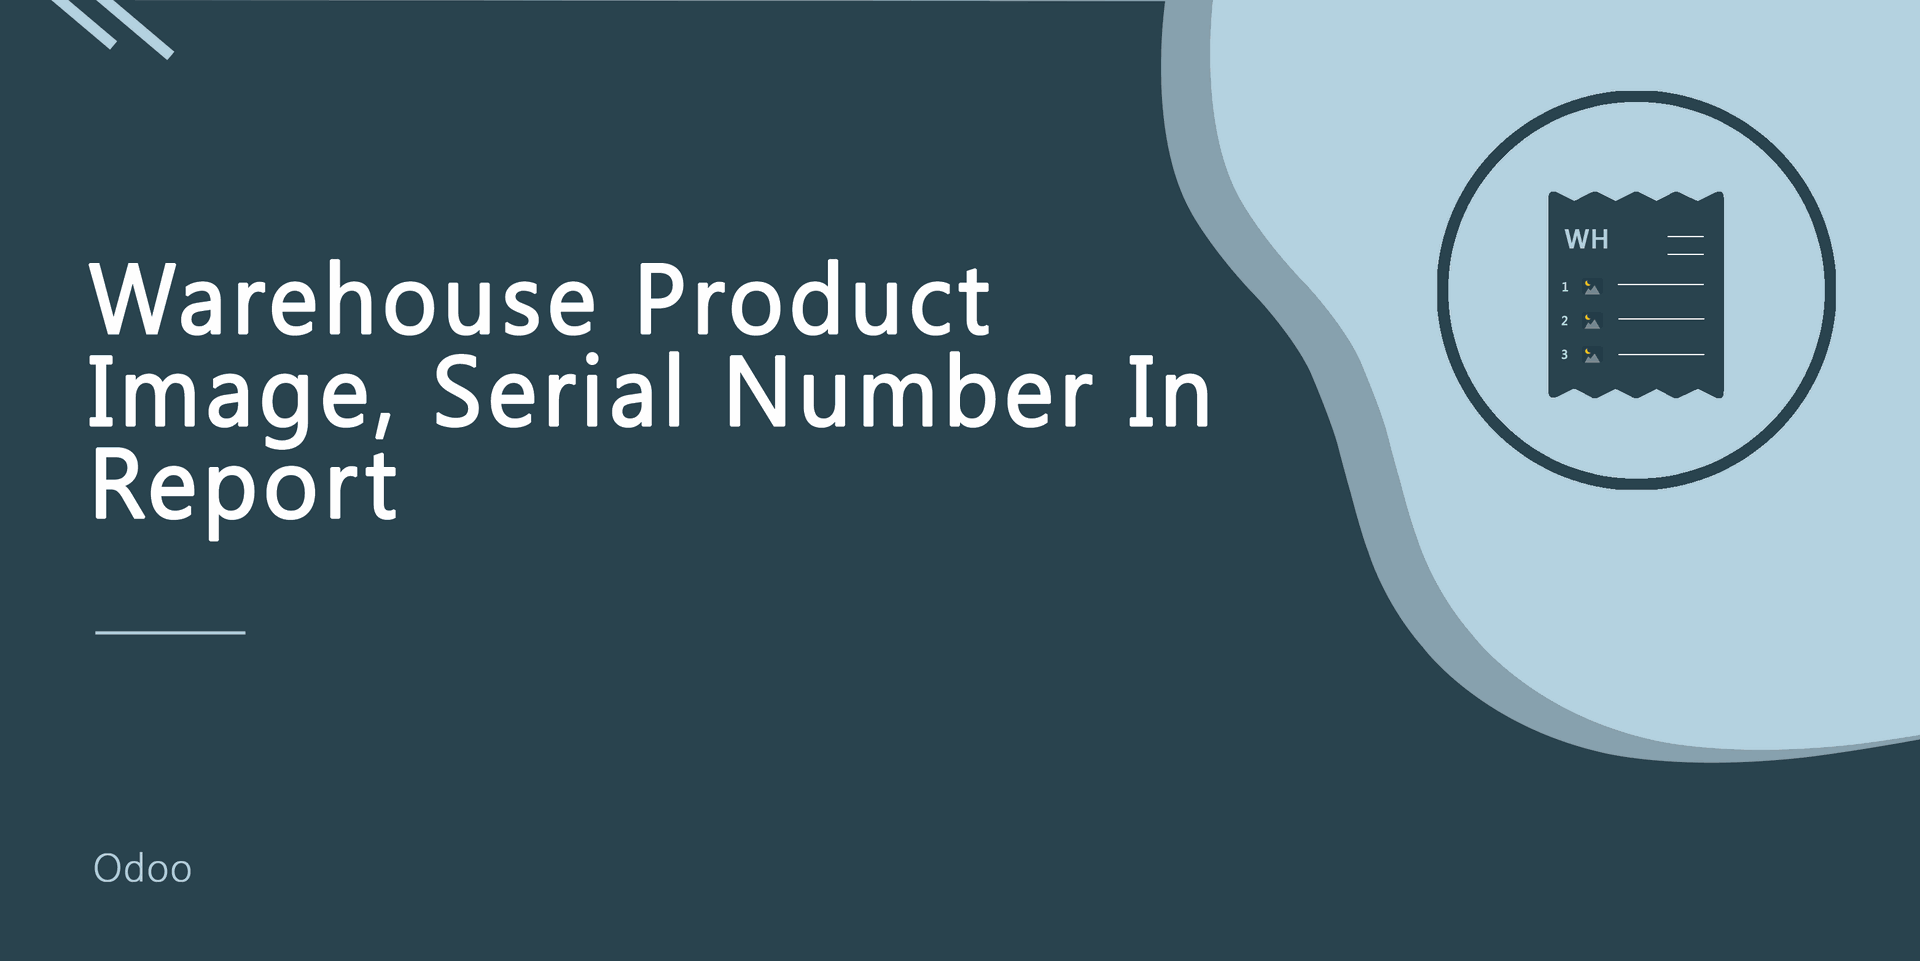 Warehouse Product Image, Serial Number In Report